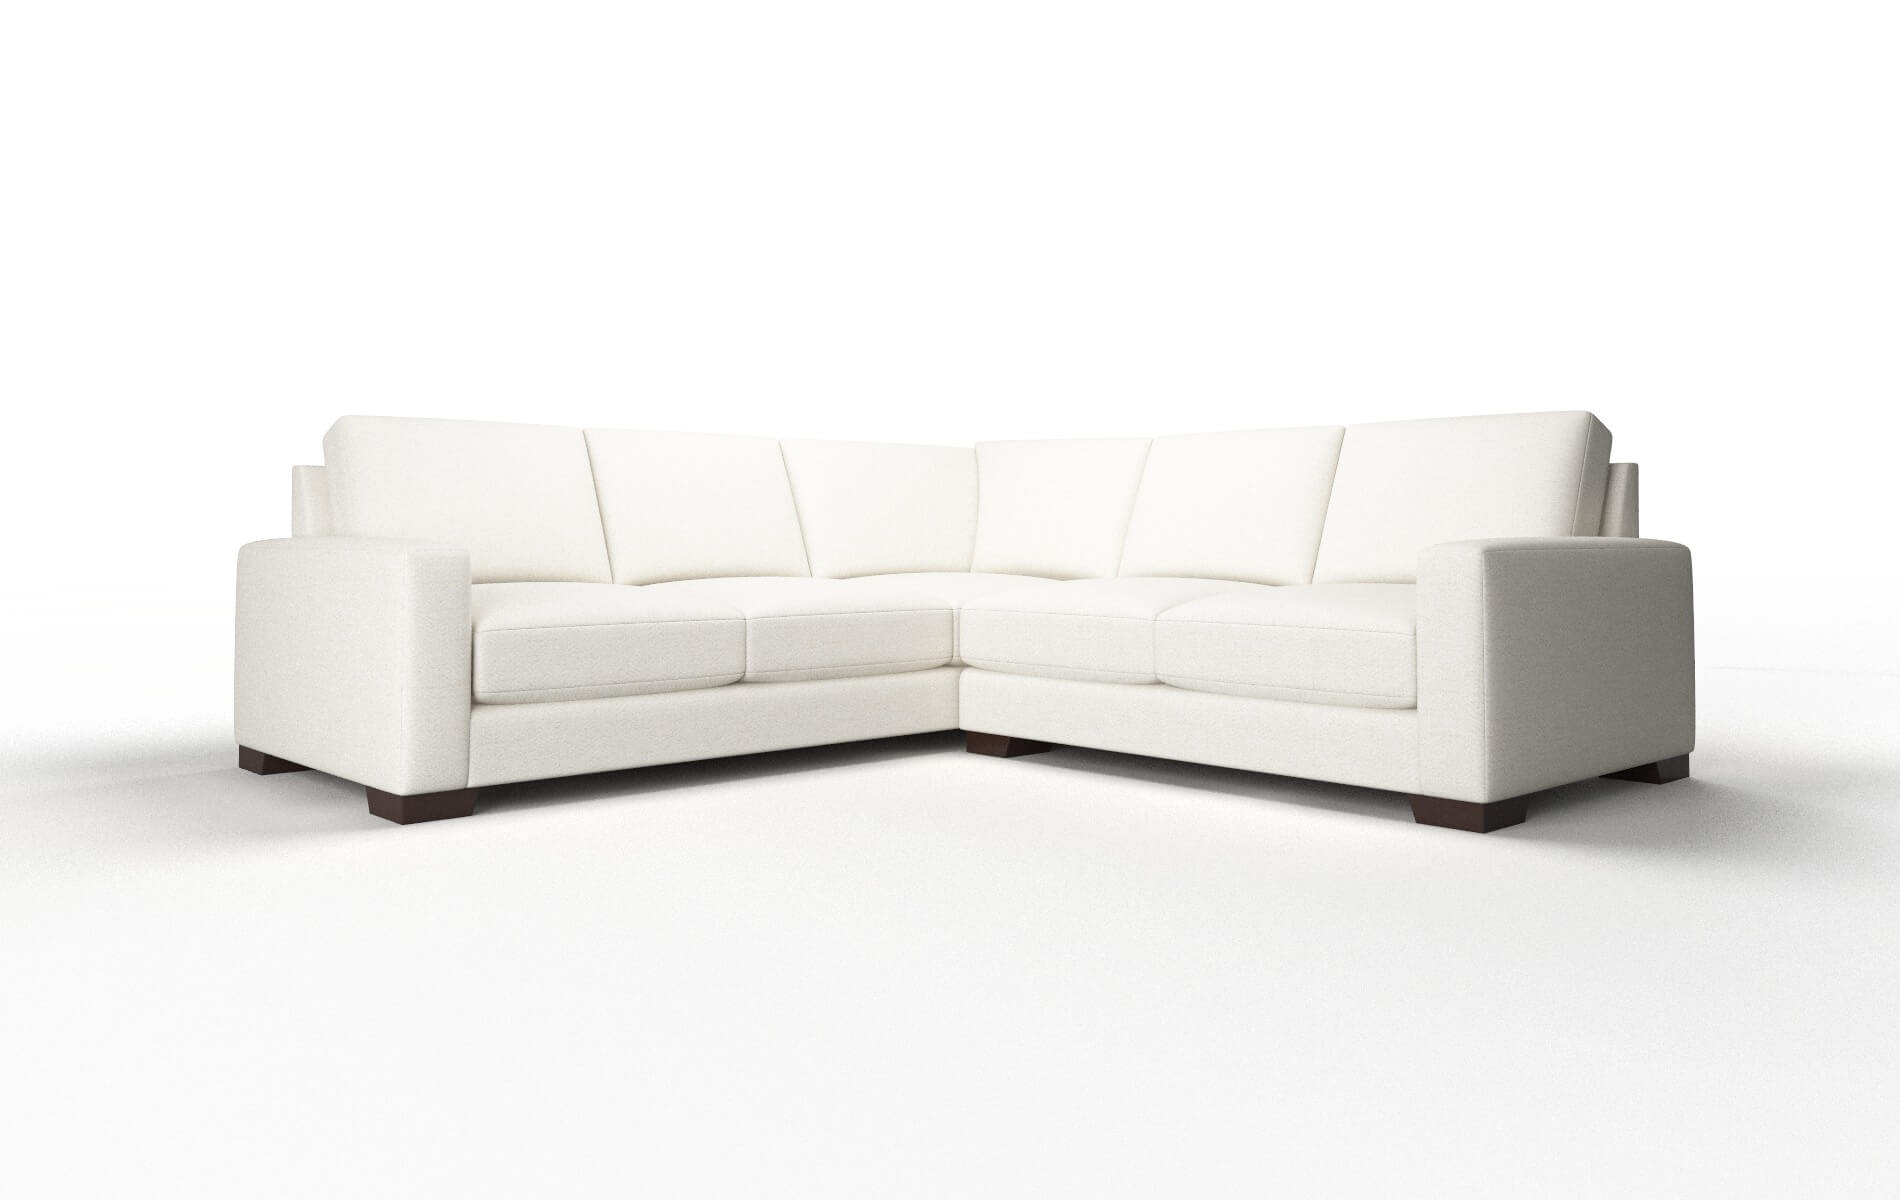 London Catalina Ivory Sectional espresso legs